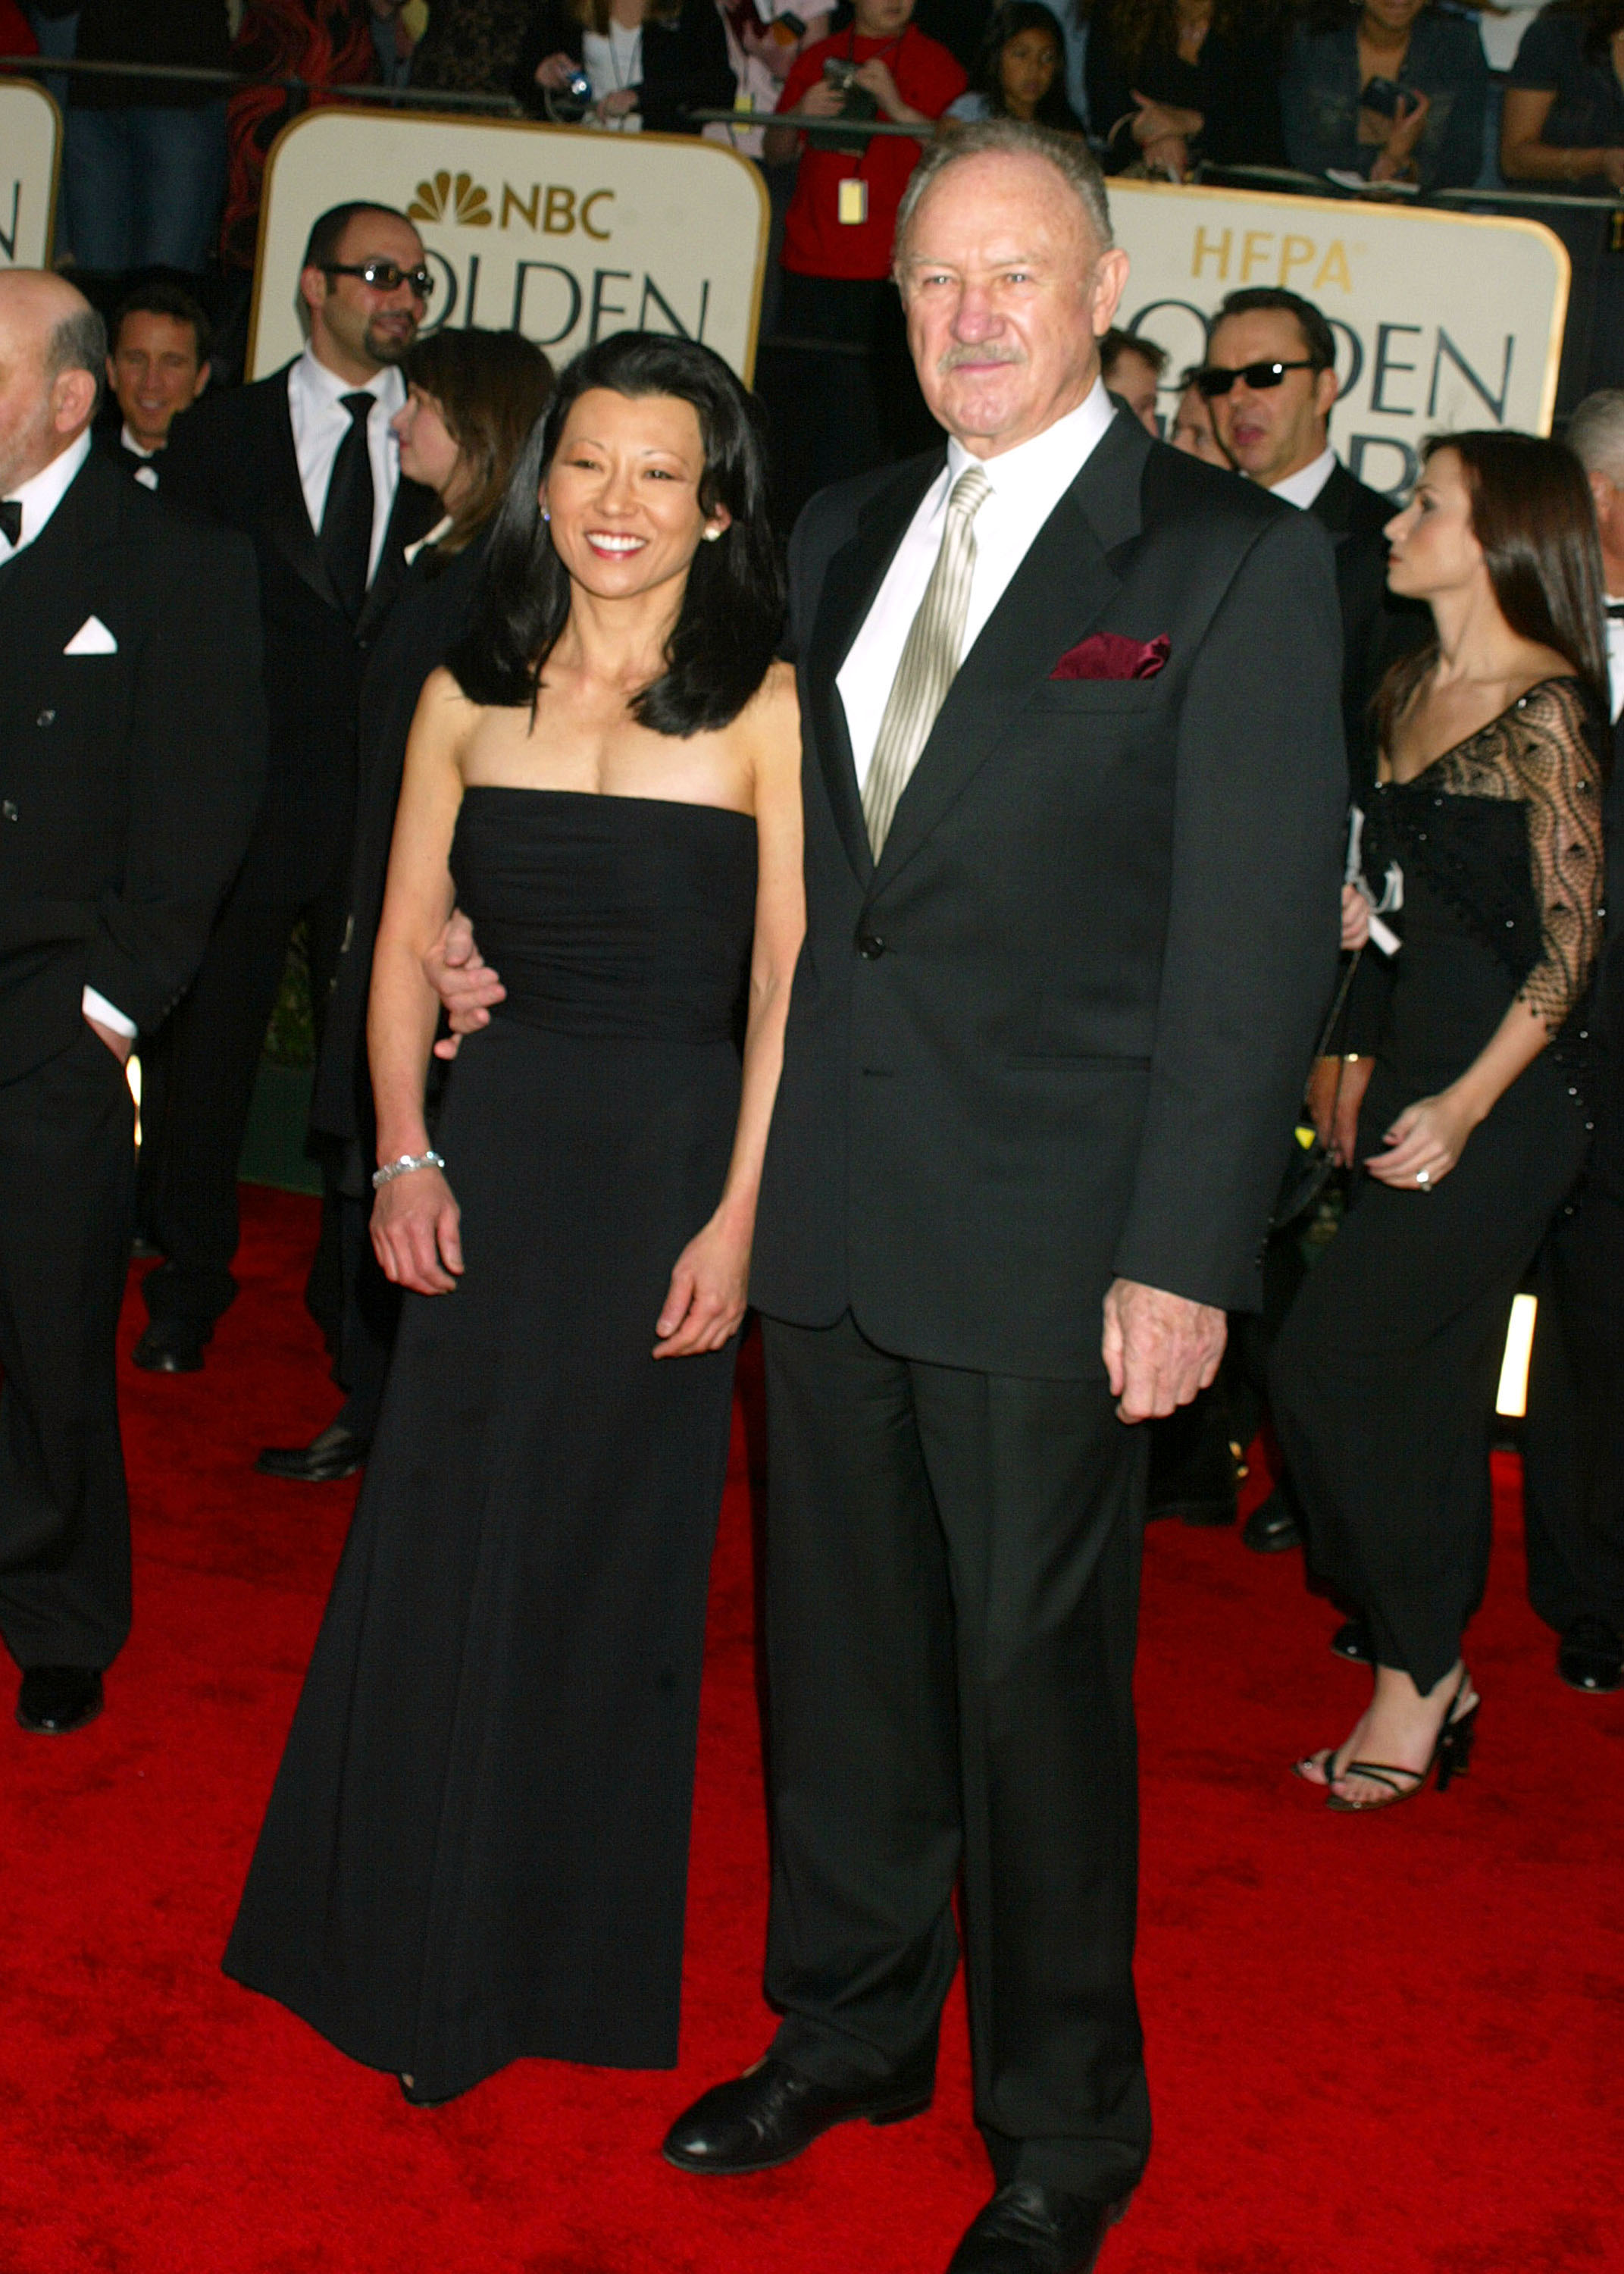 Gene Hackman and Betsy Arakawa at the 60th Annual Golden Globe Awards at The Beverly Hilton Hotel on January 19, 2003 in Beverly Hills, California. | Source: Getty Images